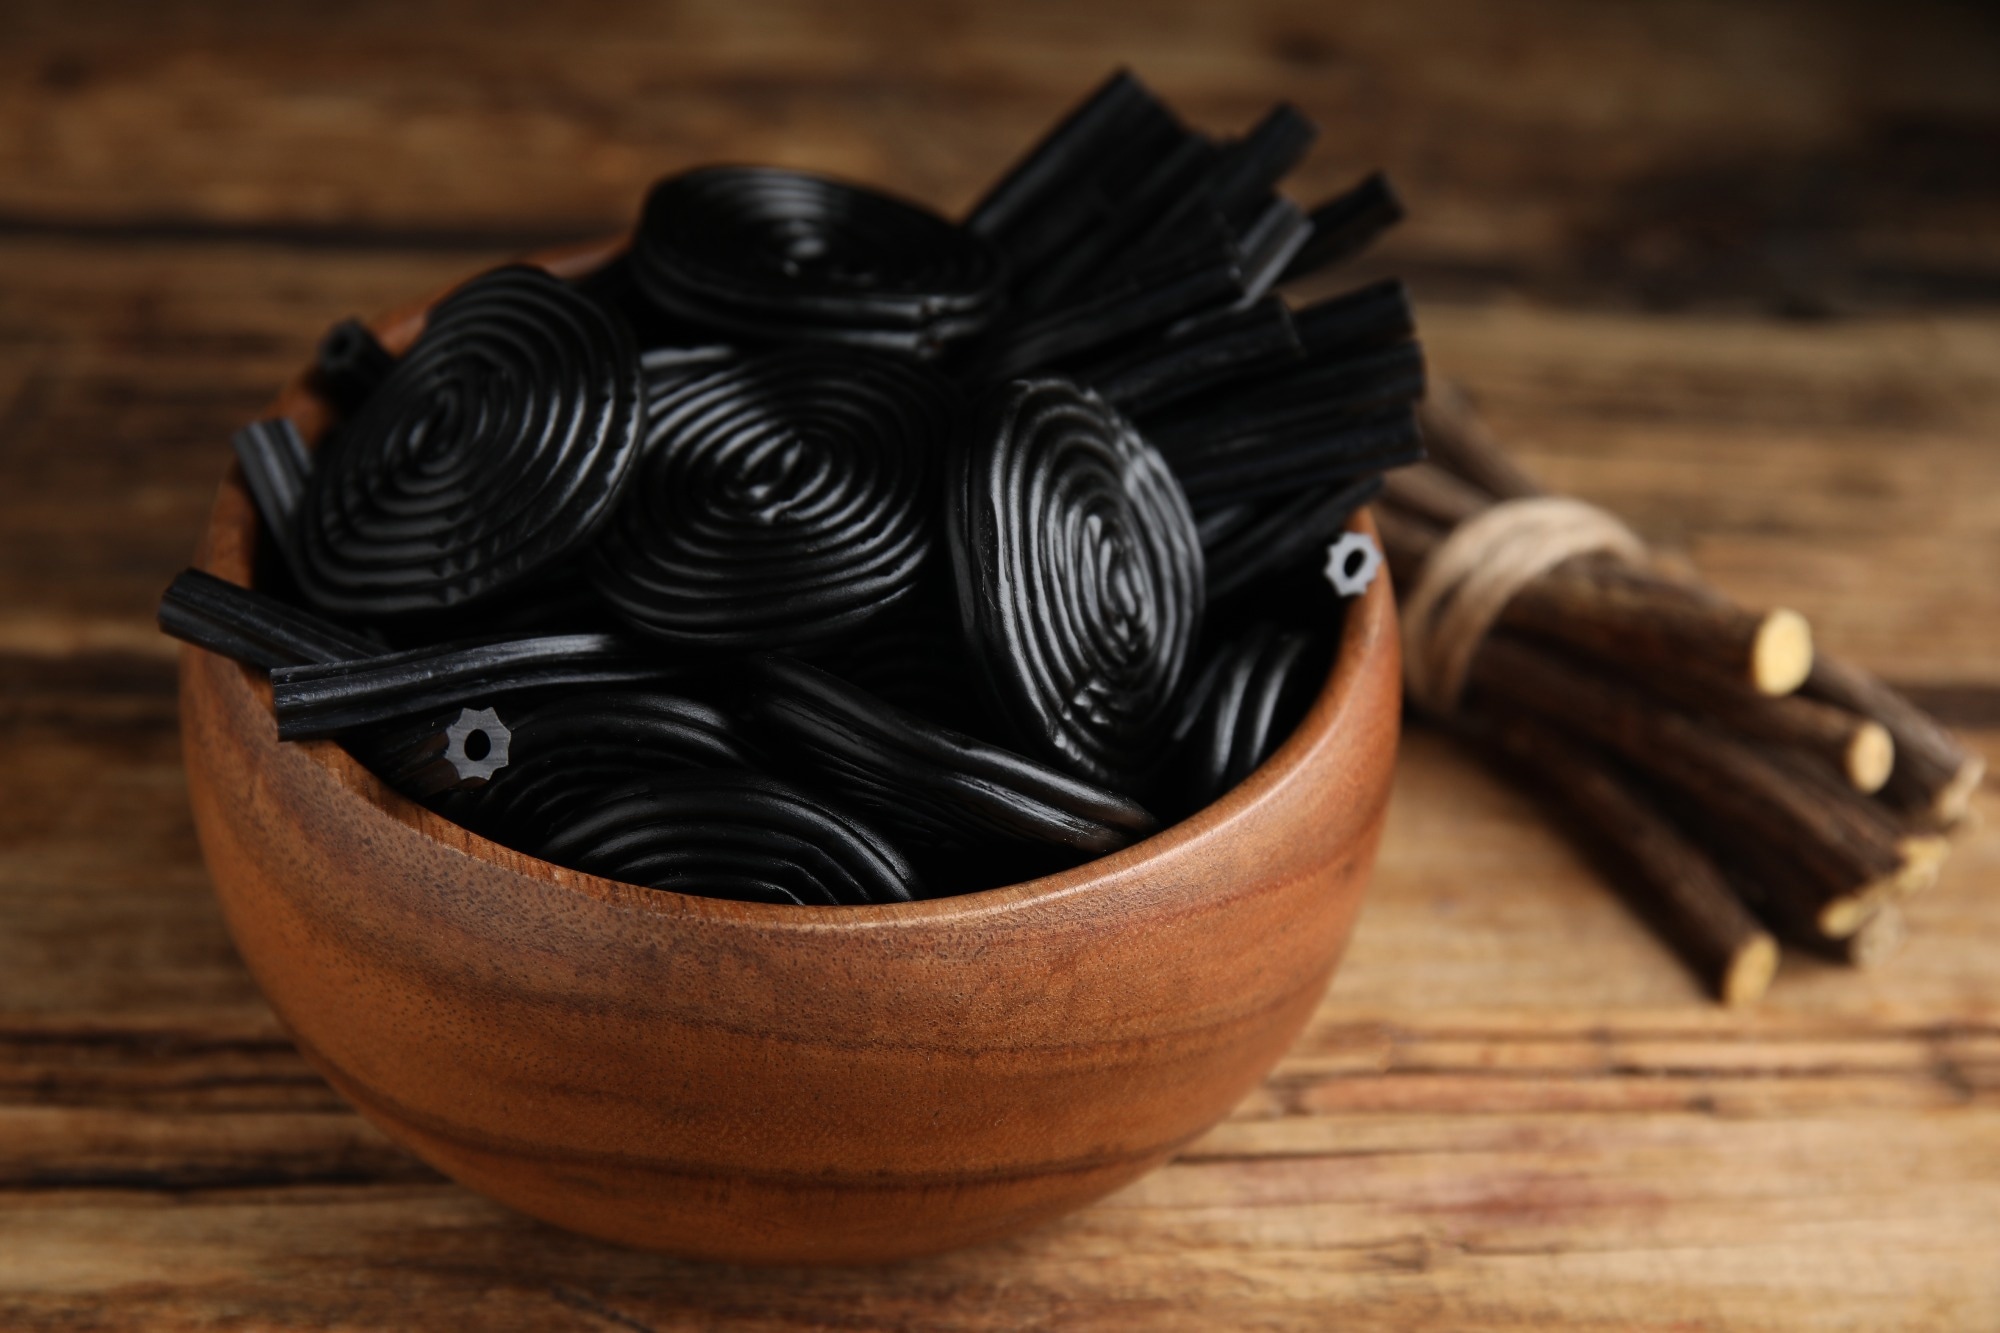 Study: A low dose of daily licorice intake affects renin, aldosterone, and home blood pressure in a randomized crossover trial. Image Credit: New Africa / Shutterstock